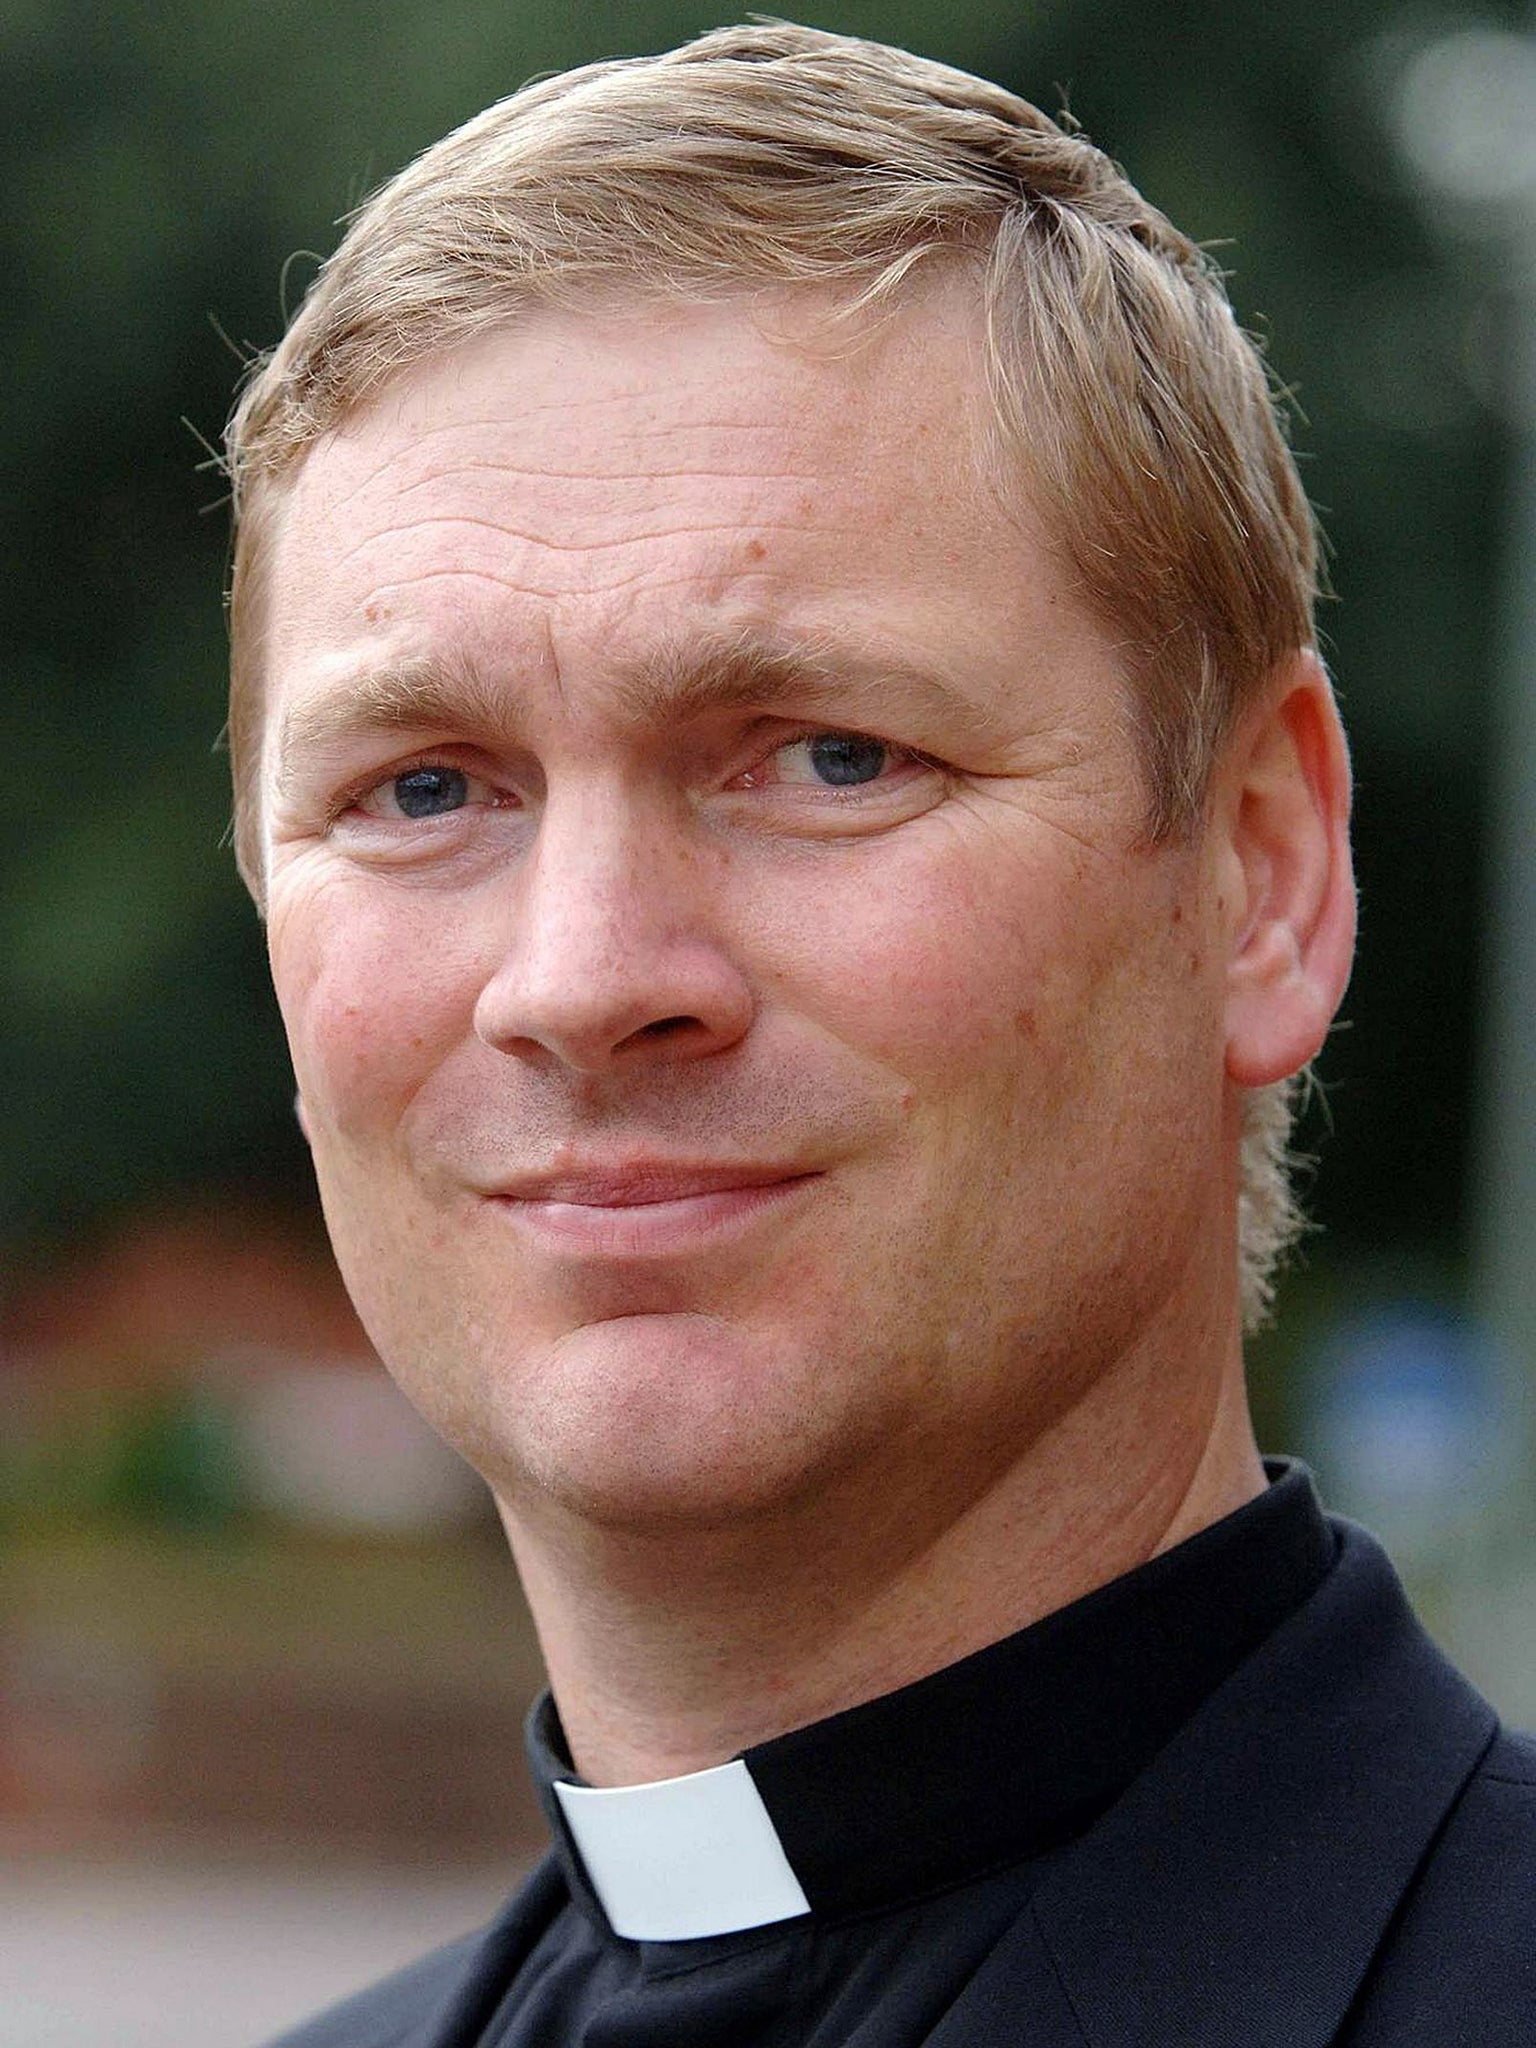 Rev Mark Sharpe claimed he was forced out of his role after hate campaign